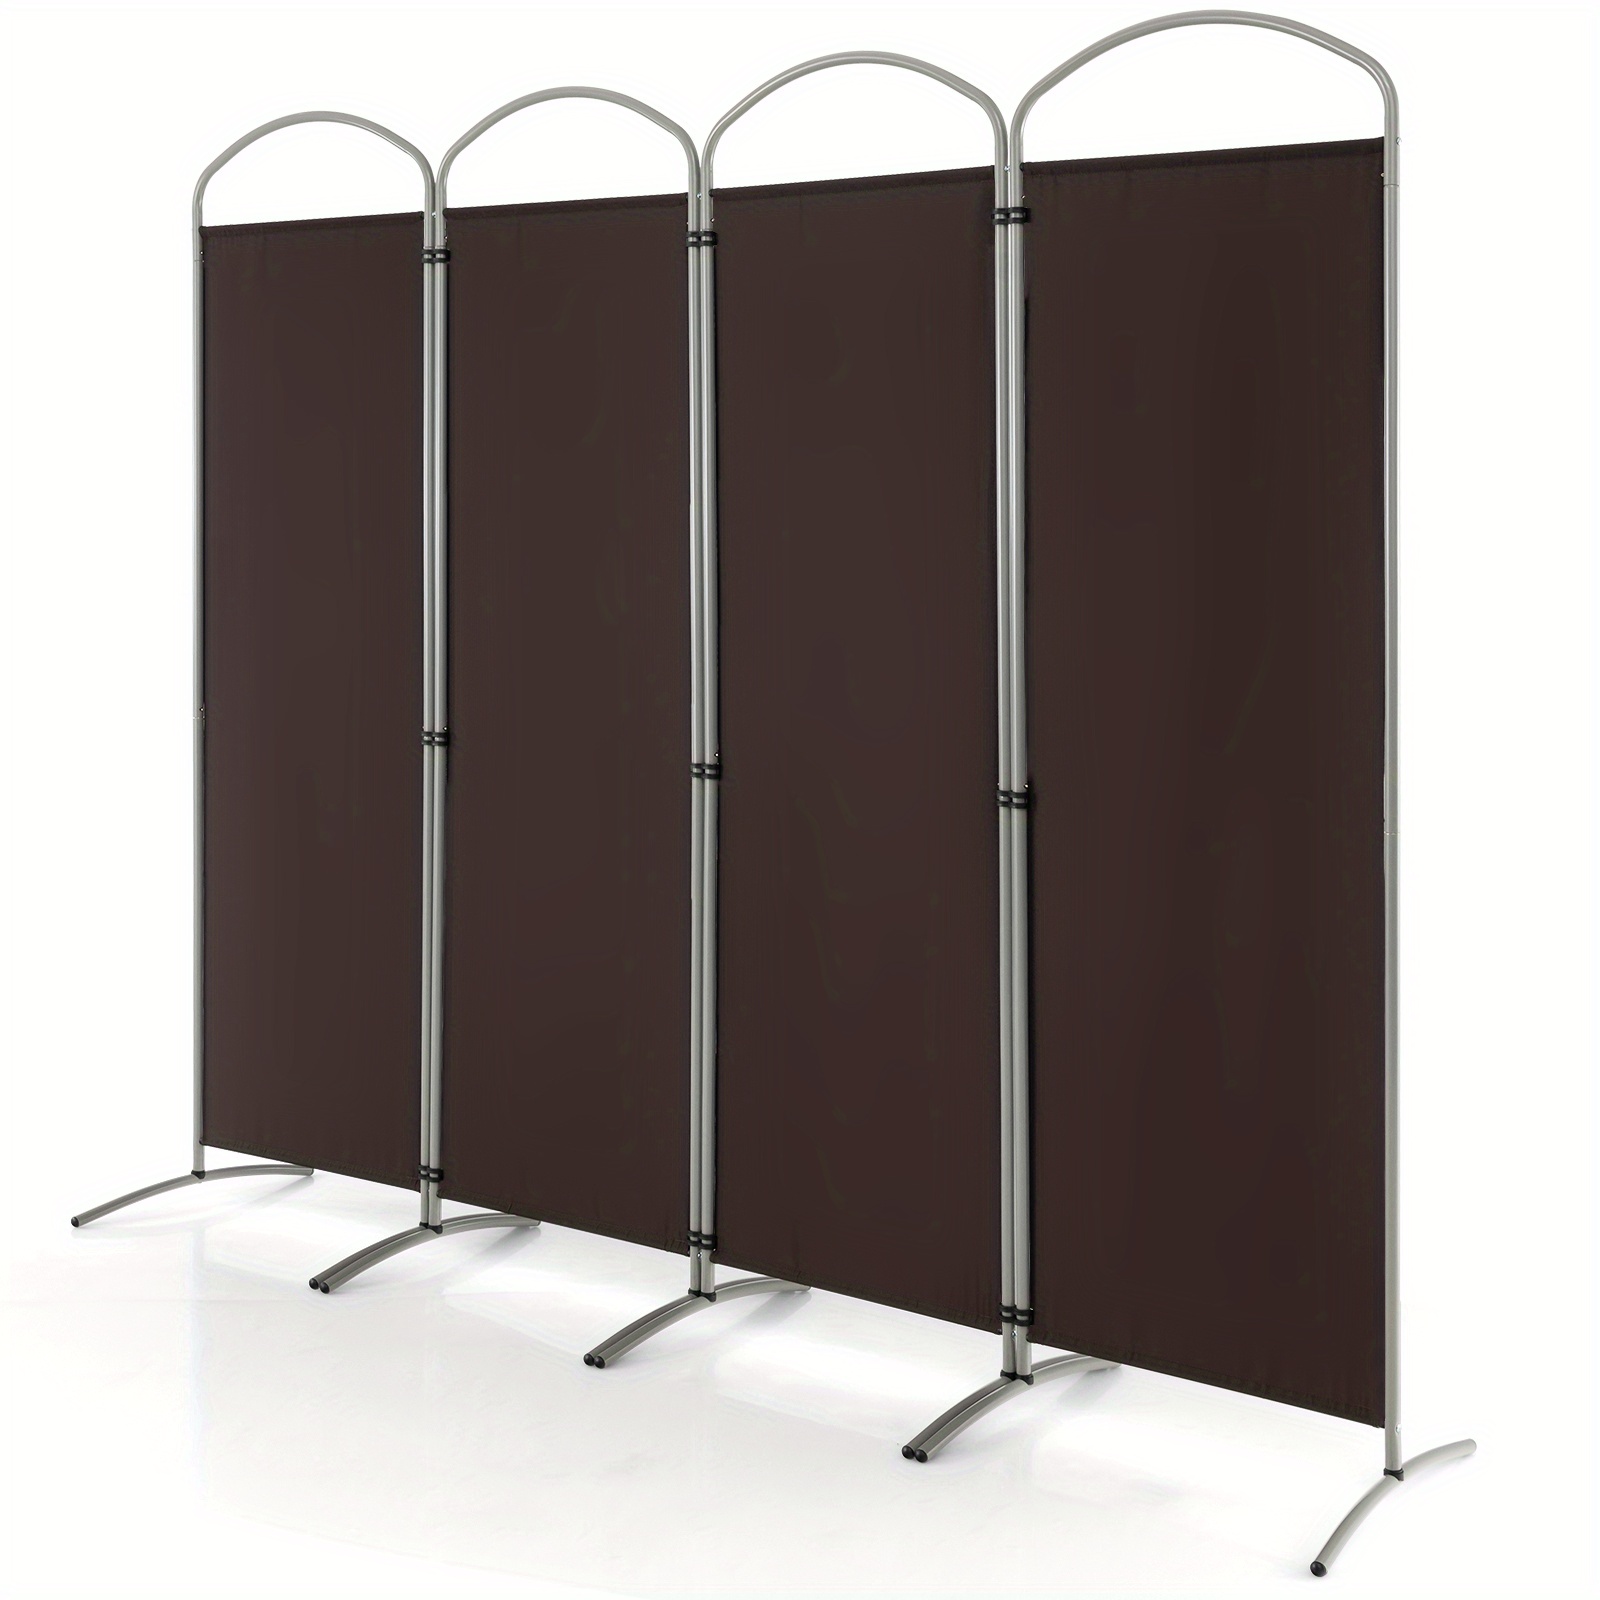 

Lifezeal 4 Panels Folding Room Divider 6 Ft Tall Fabric Privacy Screen Brown